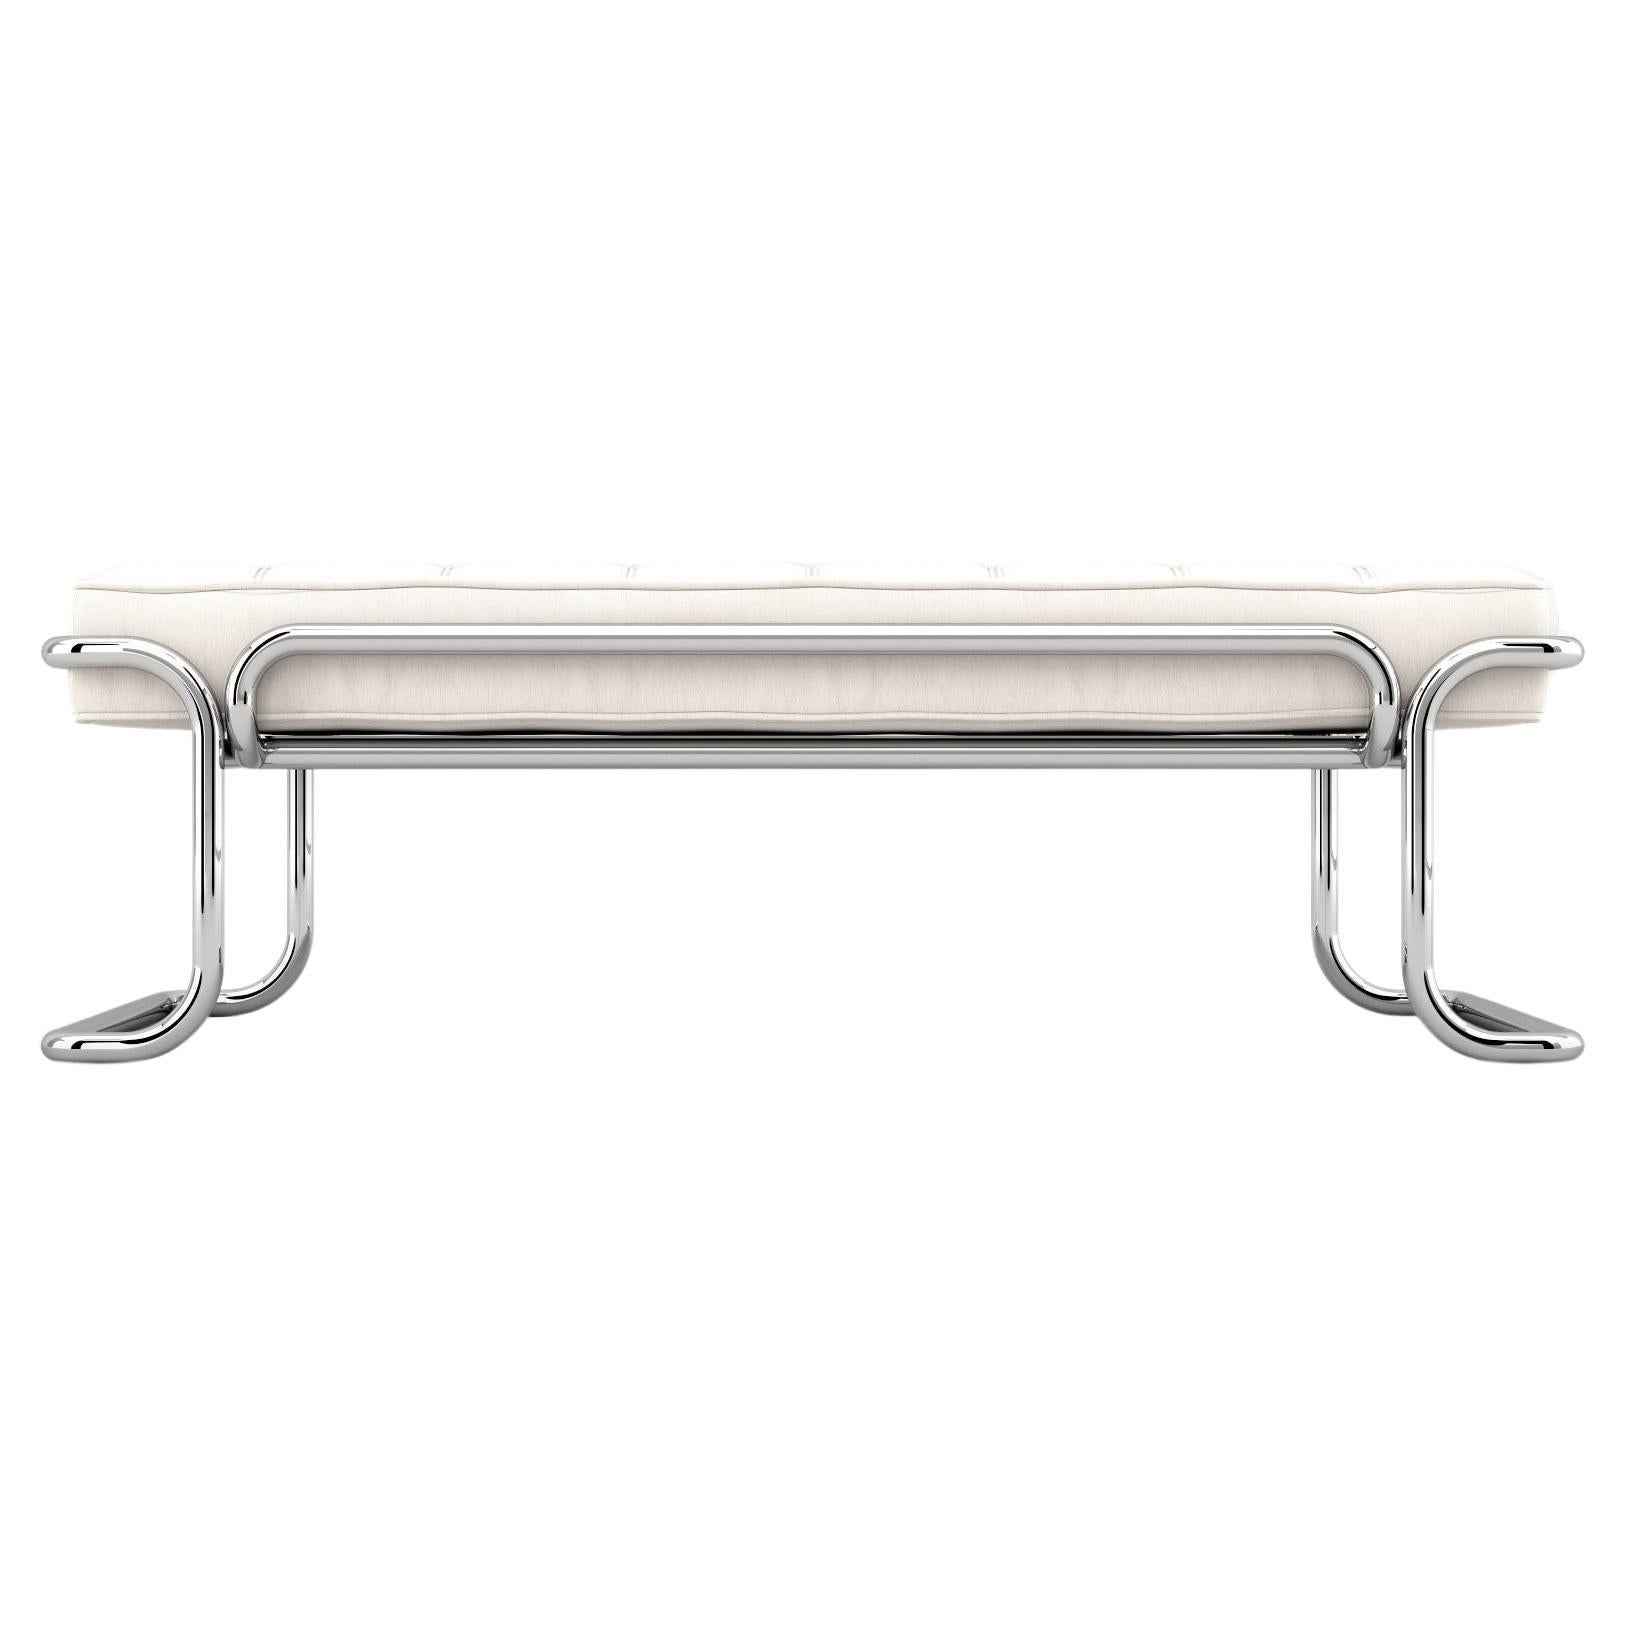 Lotus Banquette - Modern White Leather Sofa with Stainless Steel Legs For Sale